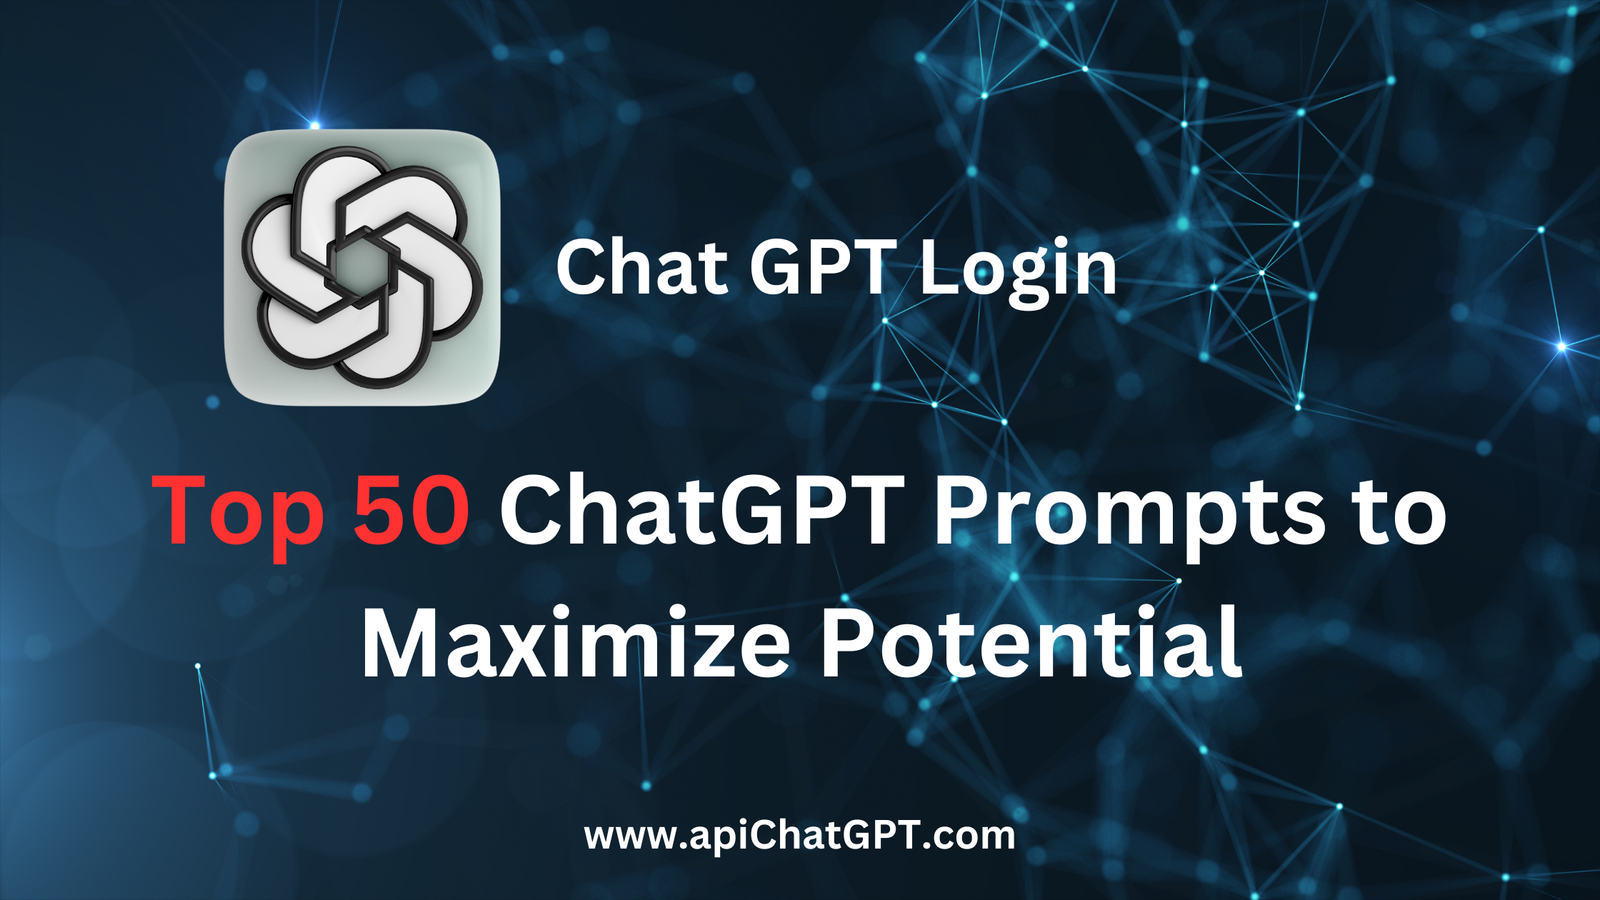 Top 50 ChatGPT Prompts for Exploring the Capabilities of AI - Chat GPT Login